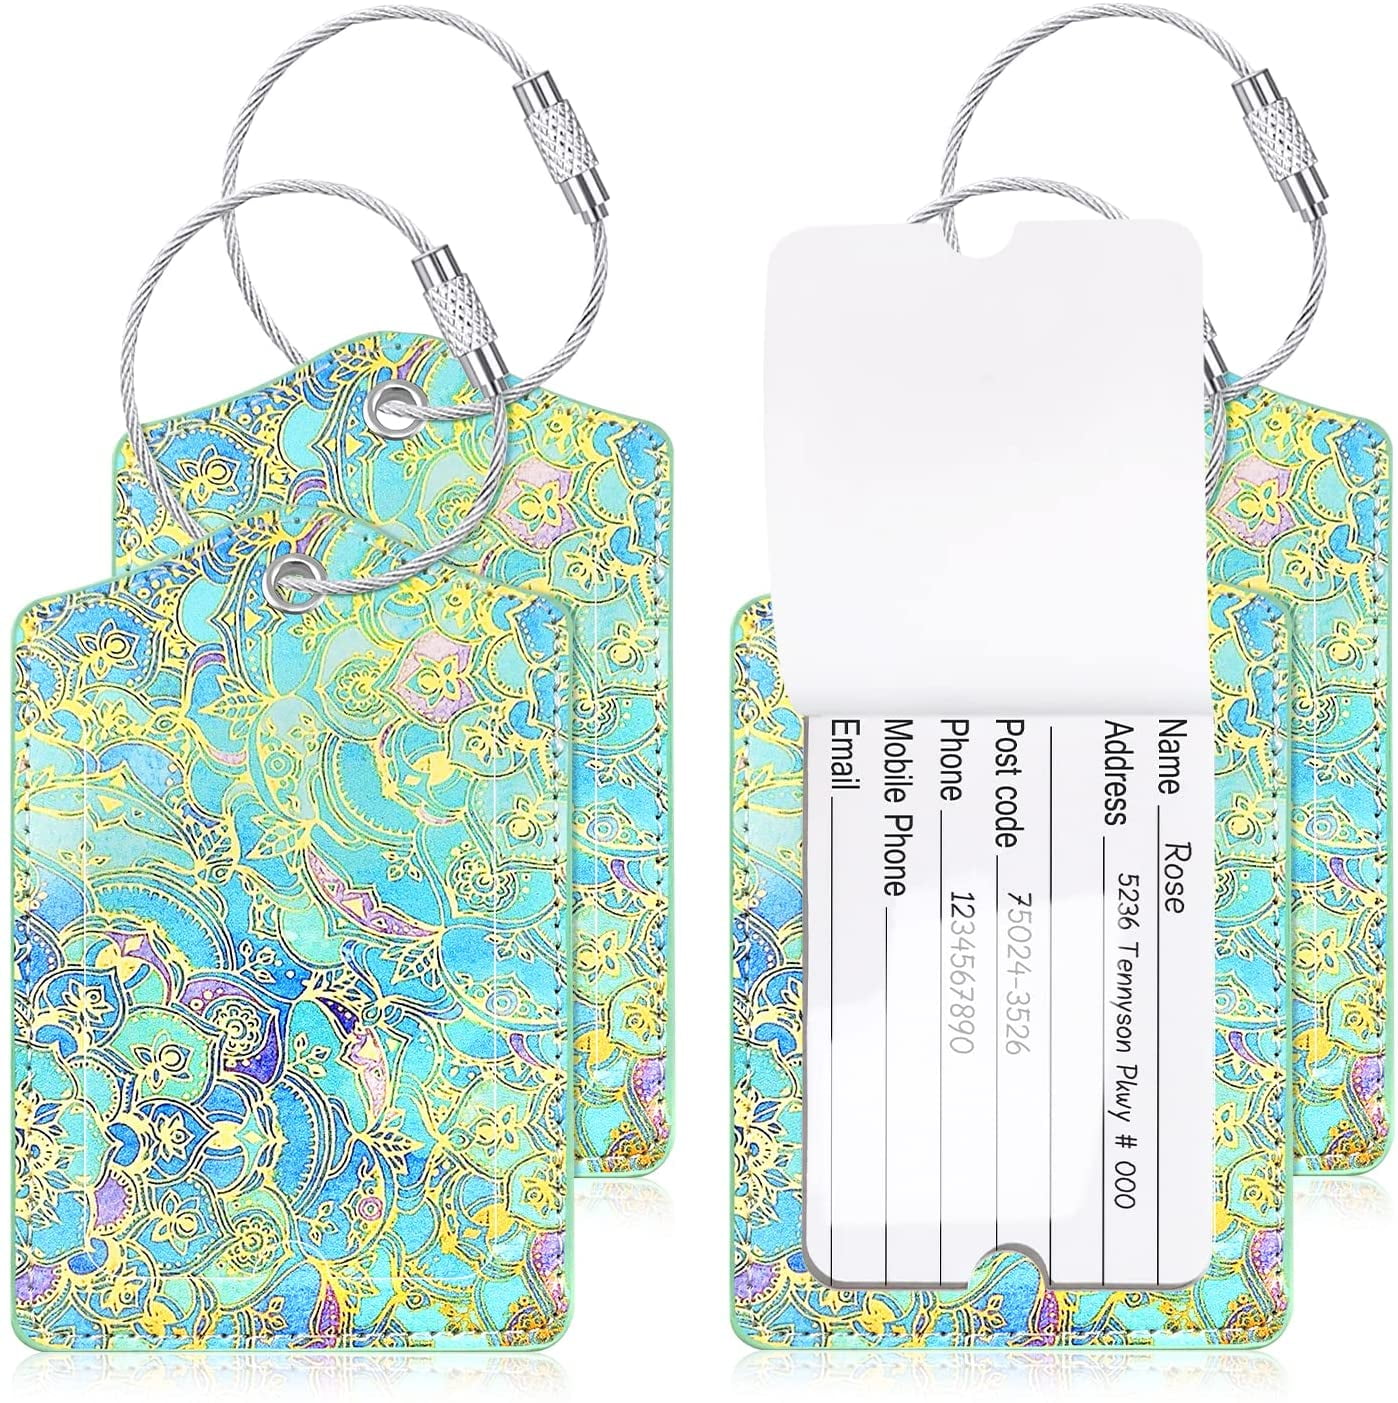 Space Cat Travel Luggage Tags With Full Privacy Cover Leather Case And Stainless Steel Loop